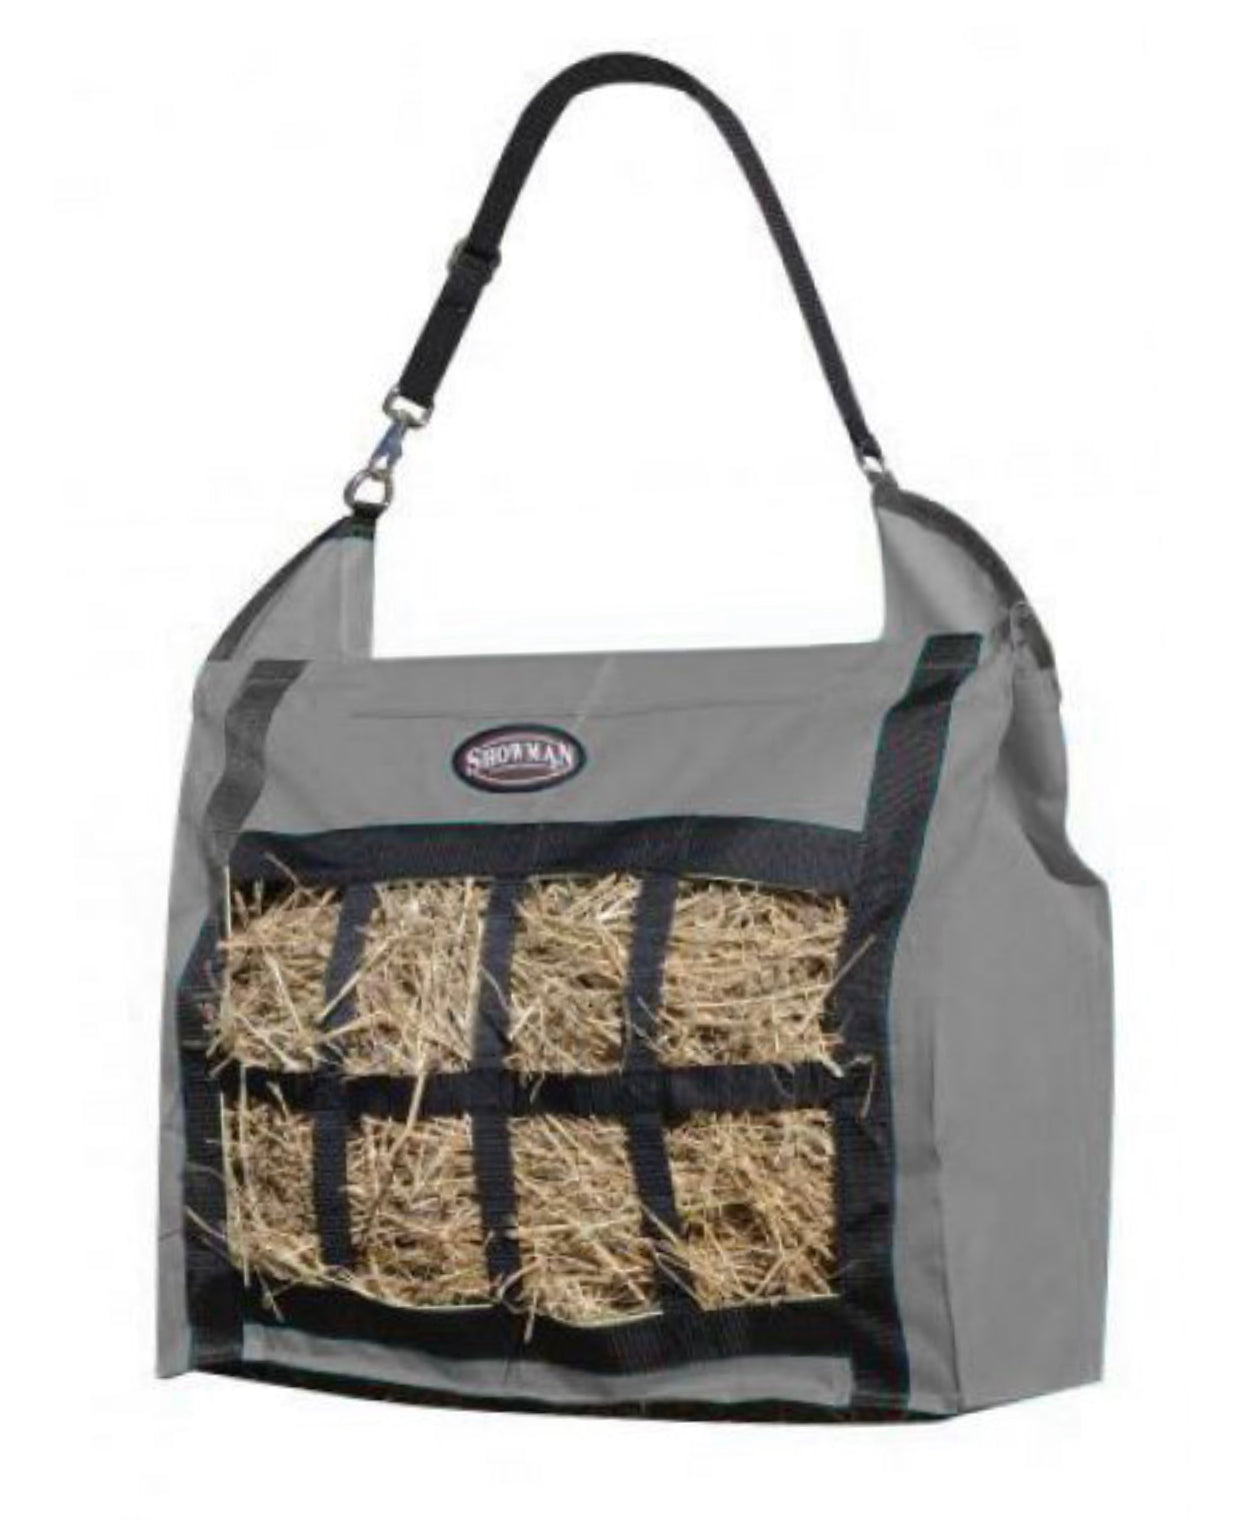 T5530G - Grey Slow feed hay tote